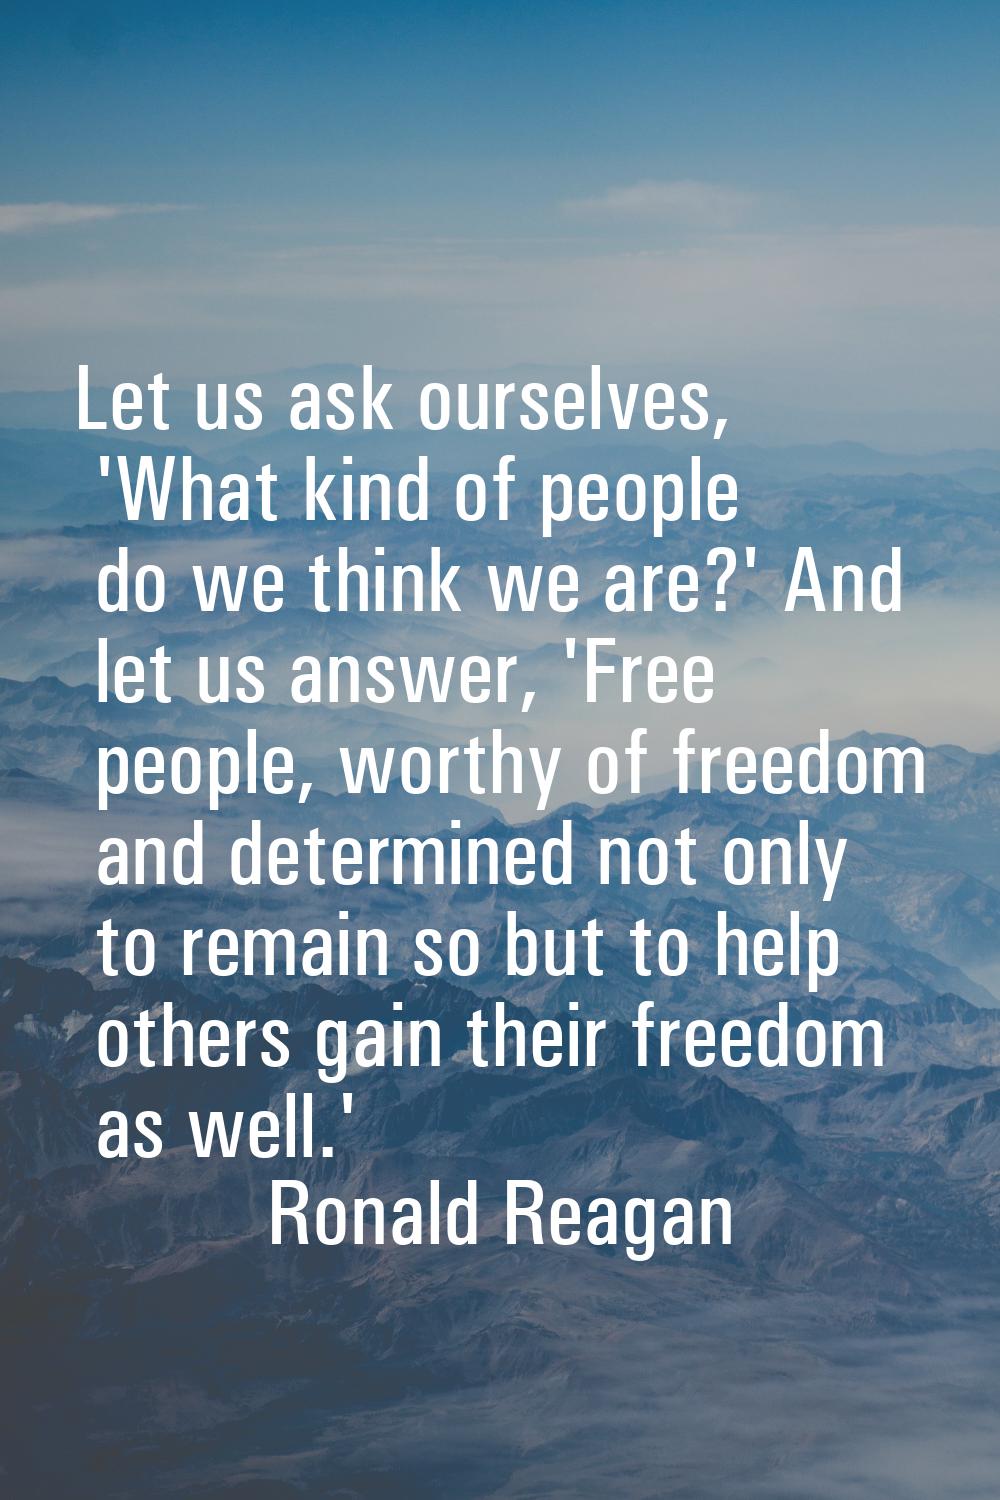 Let us ask ourselves, 'What kind of people do we think we are?' And let us answer, 'Free people, wo